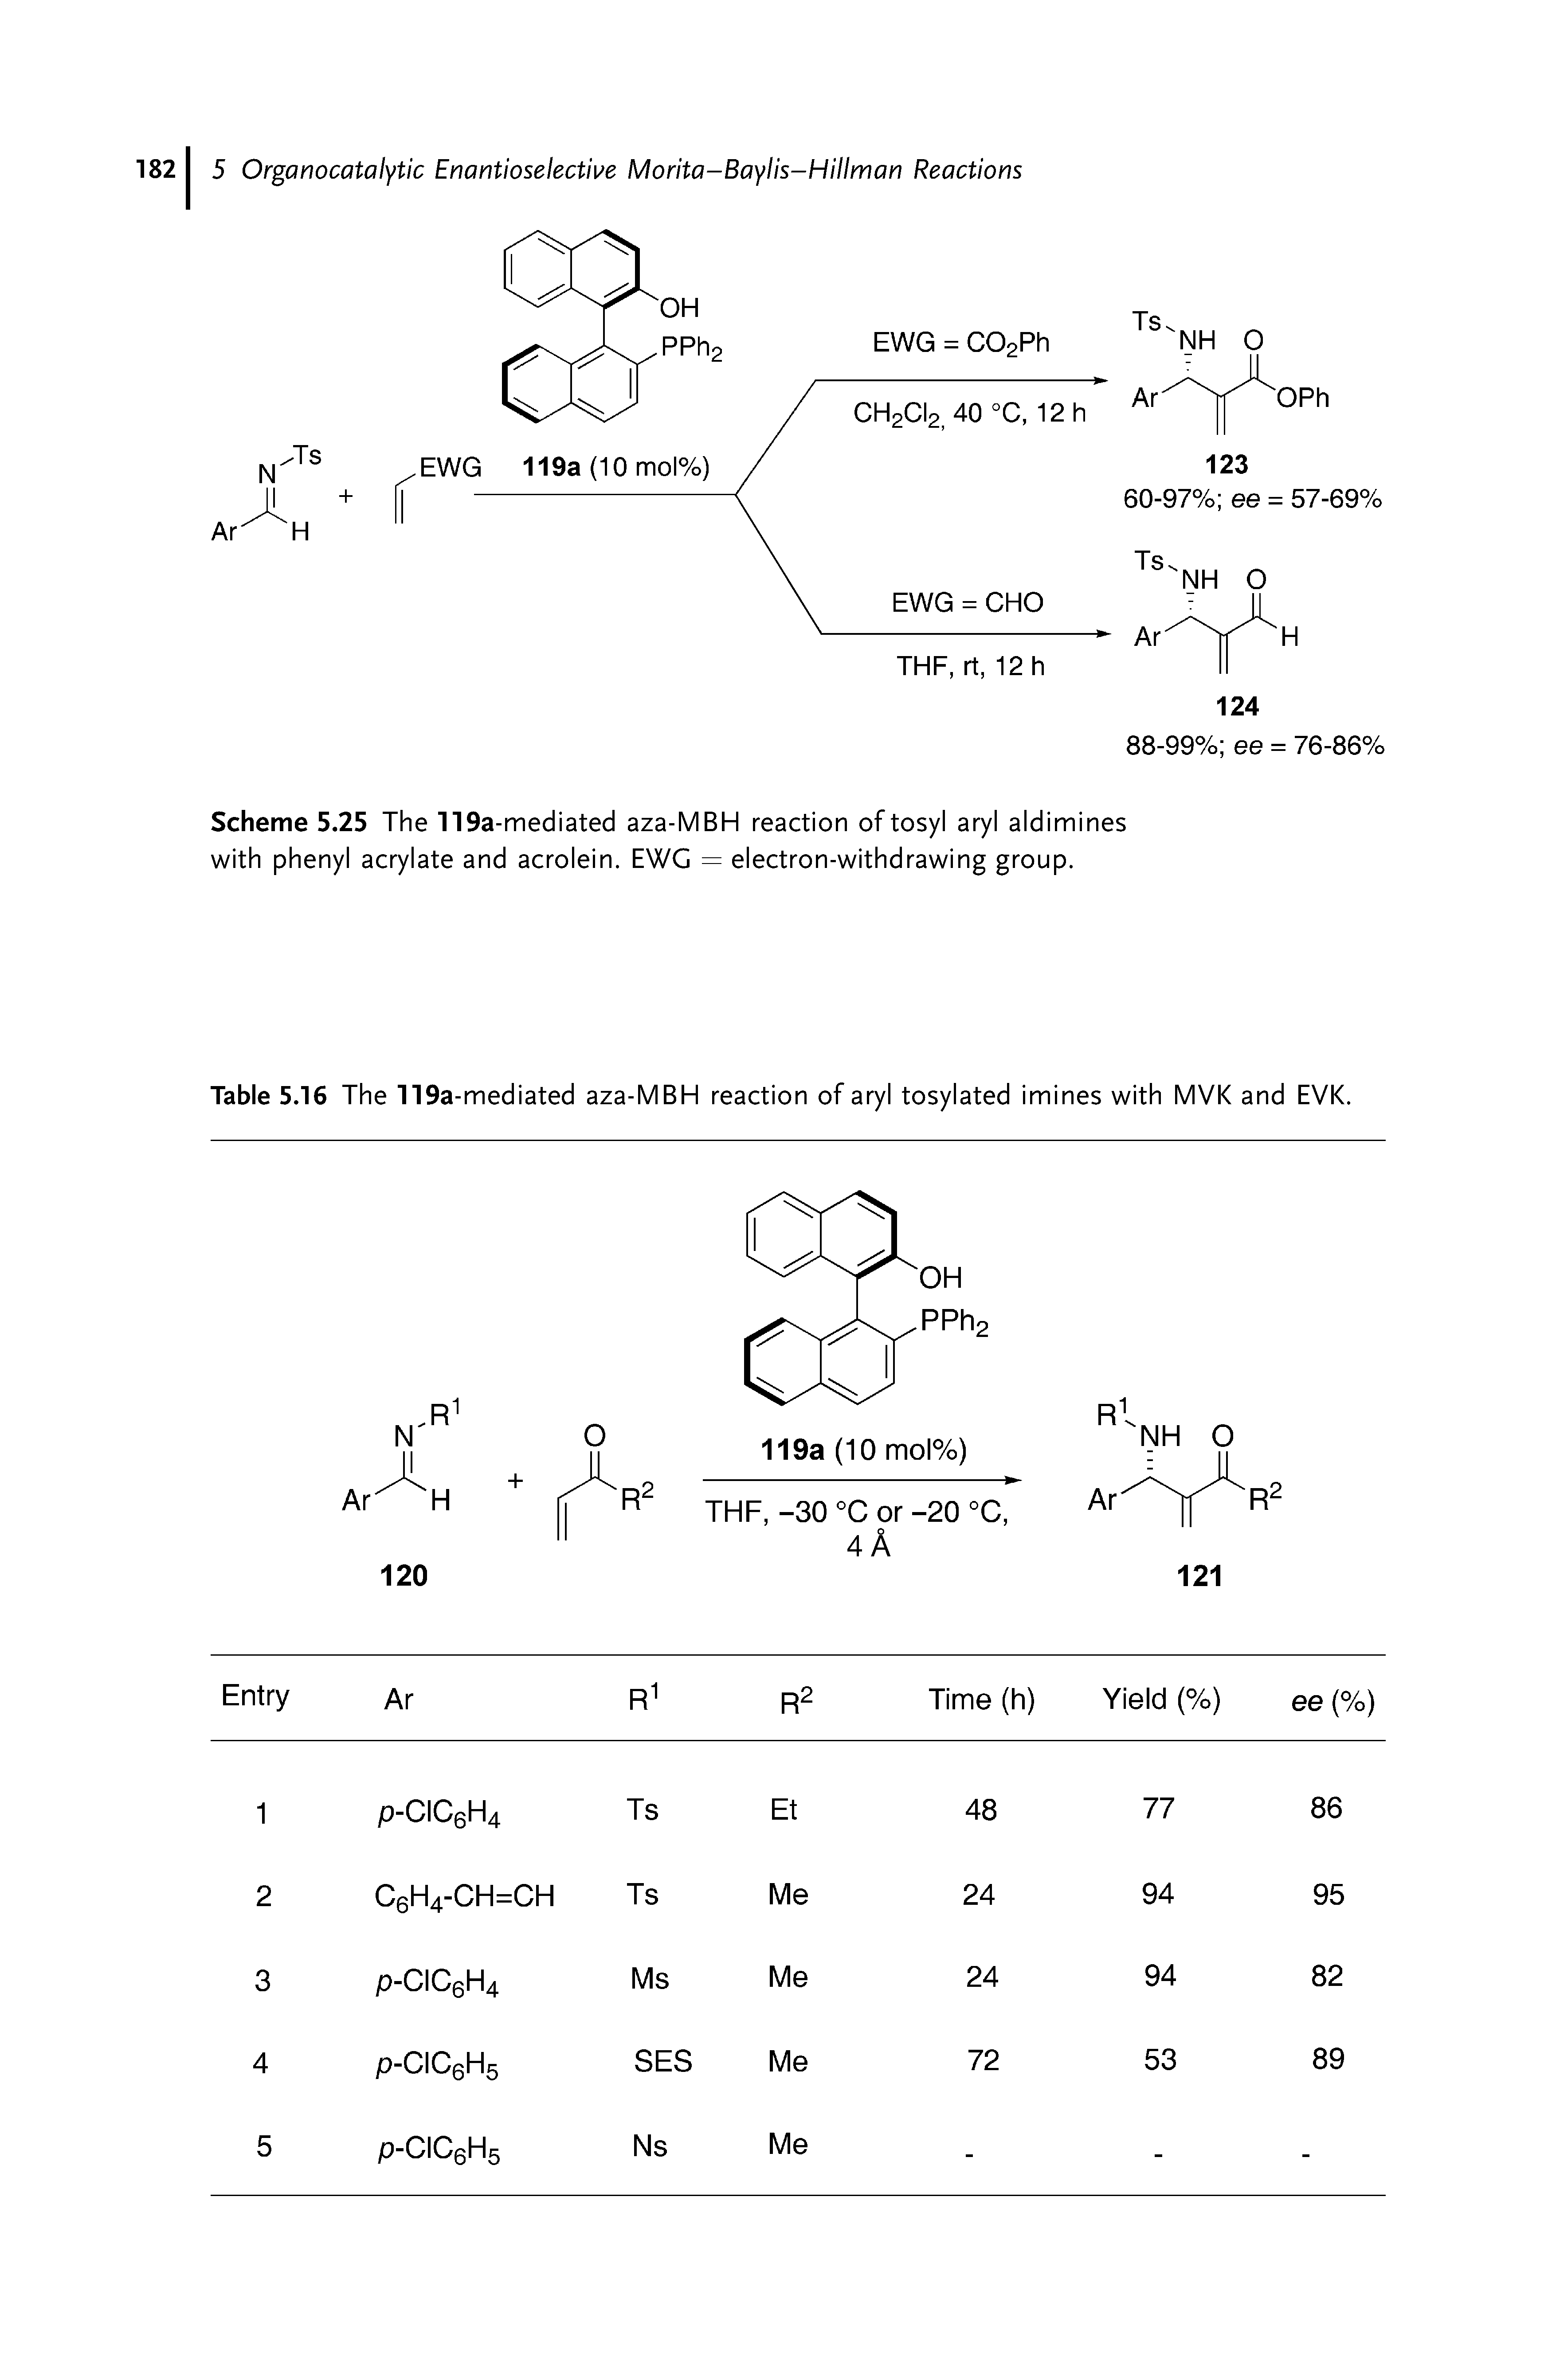 Table 5.16 The 119a-mediated aza-MBH reaction of aryl tosylated imines with MVK and EVK.